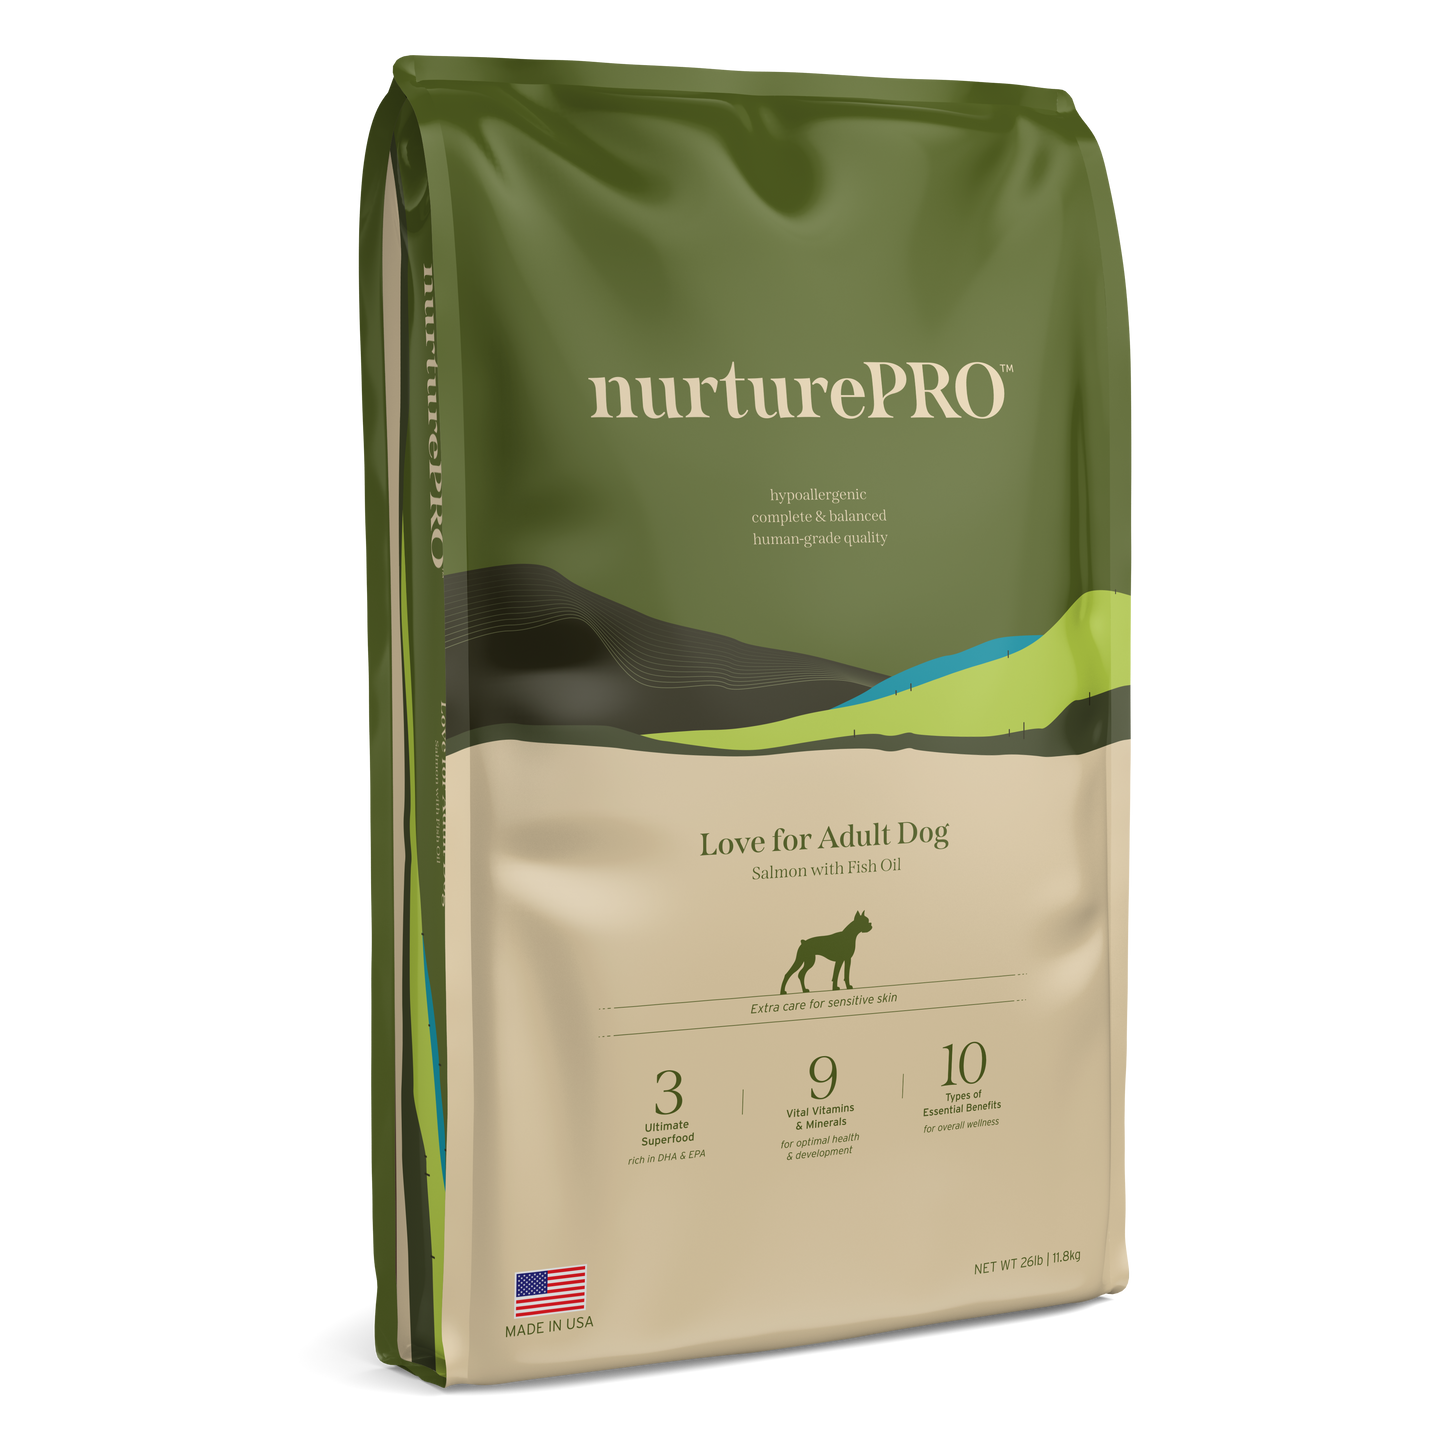 Nurture Pro Love Salmon & Fish Oil Recipe for Adult Dog Dry Food (3 Sizes)